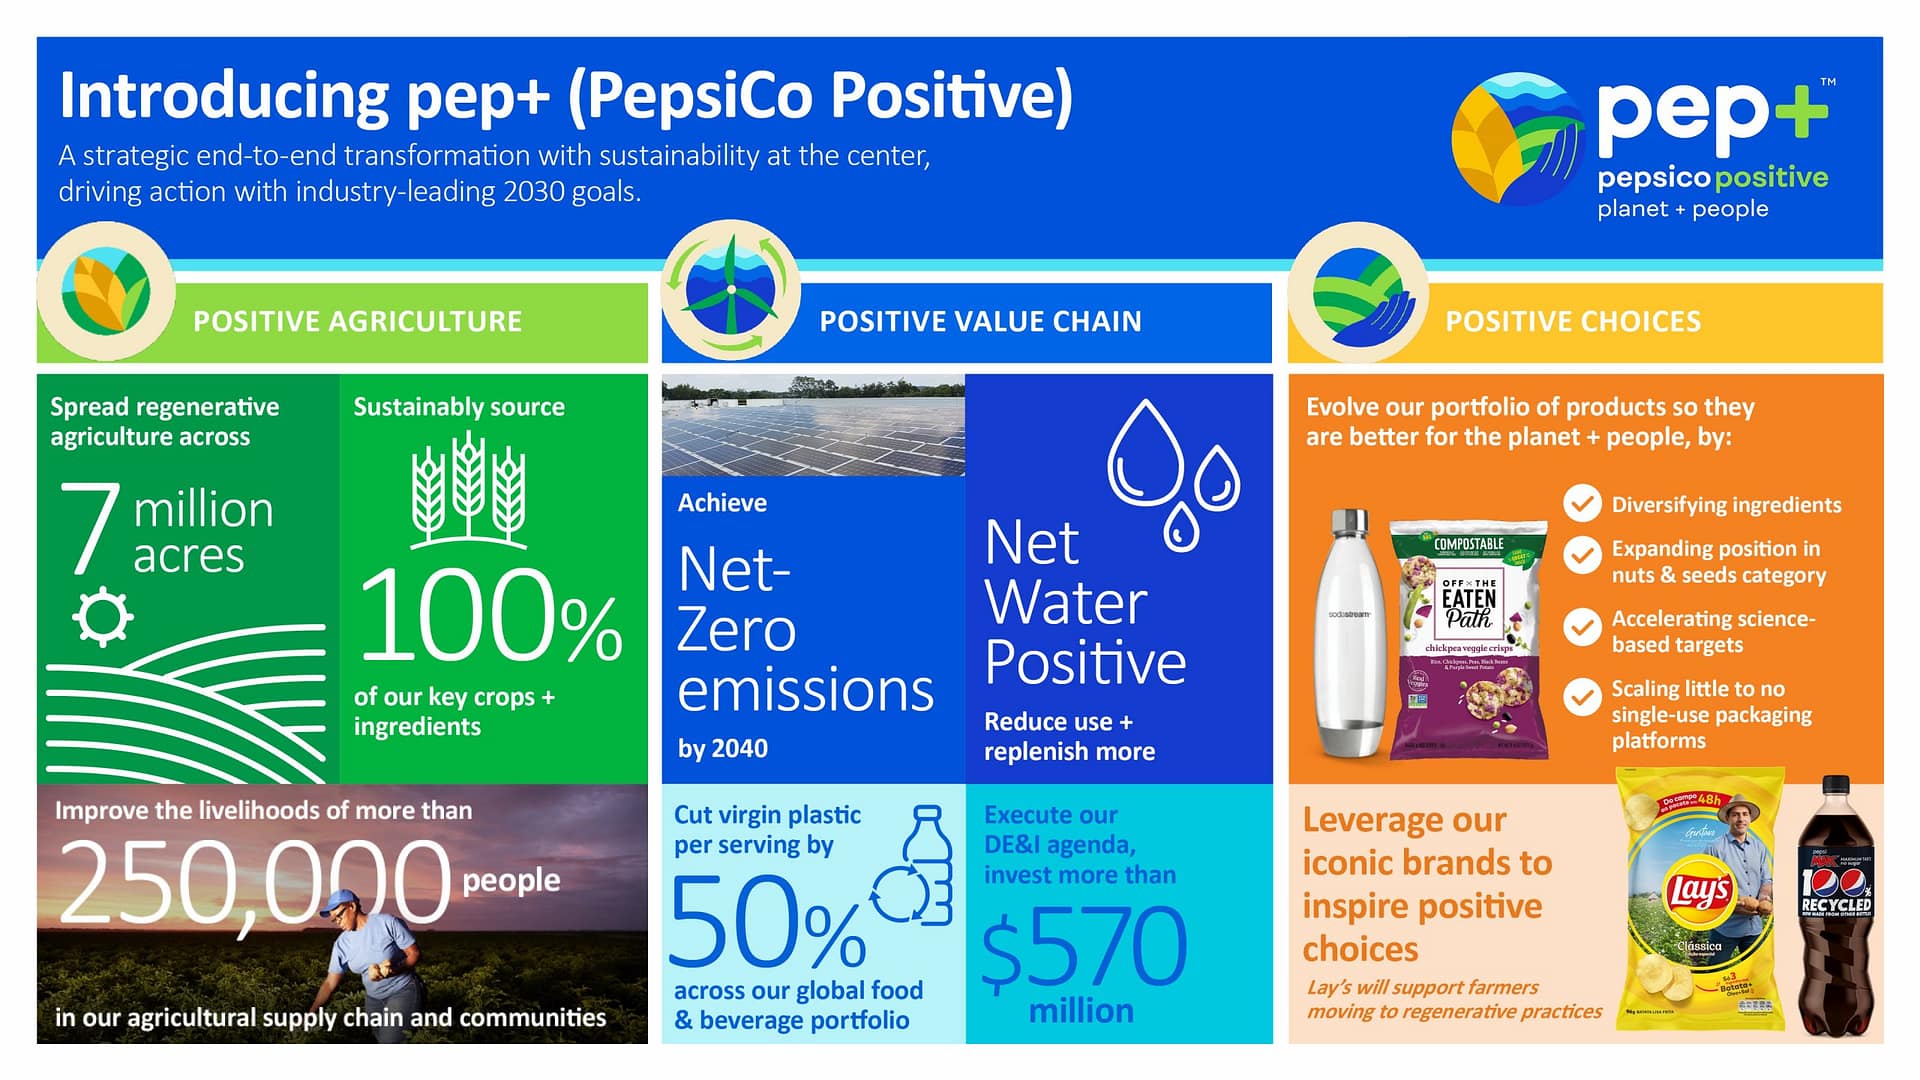 pep+ (pep Positive) is a strategic end-to-end transformation focused on sustainability and operating within planetary boundaries.